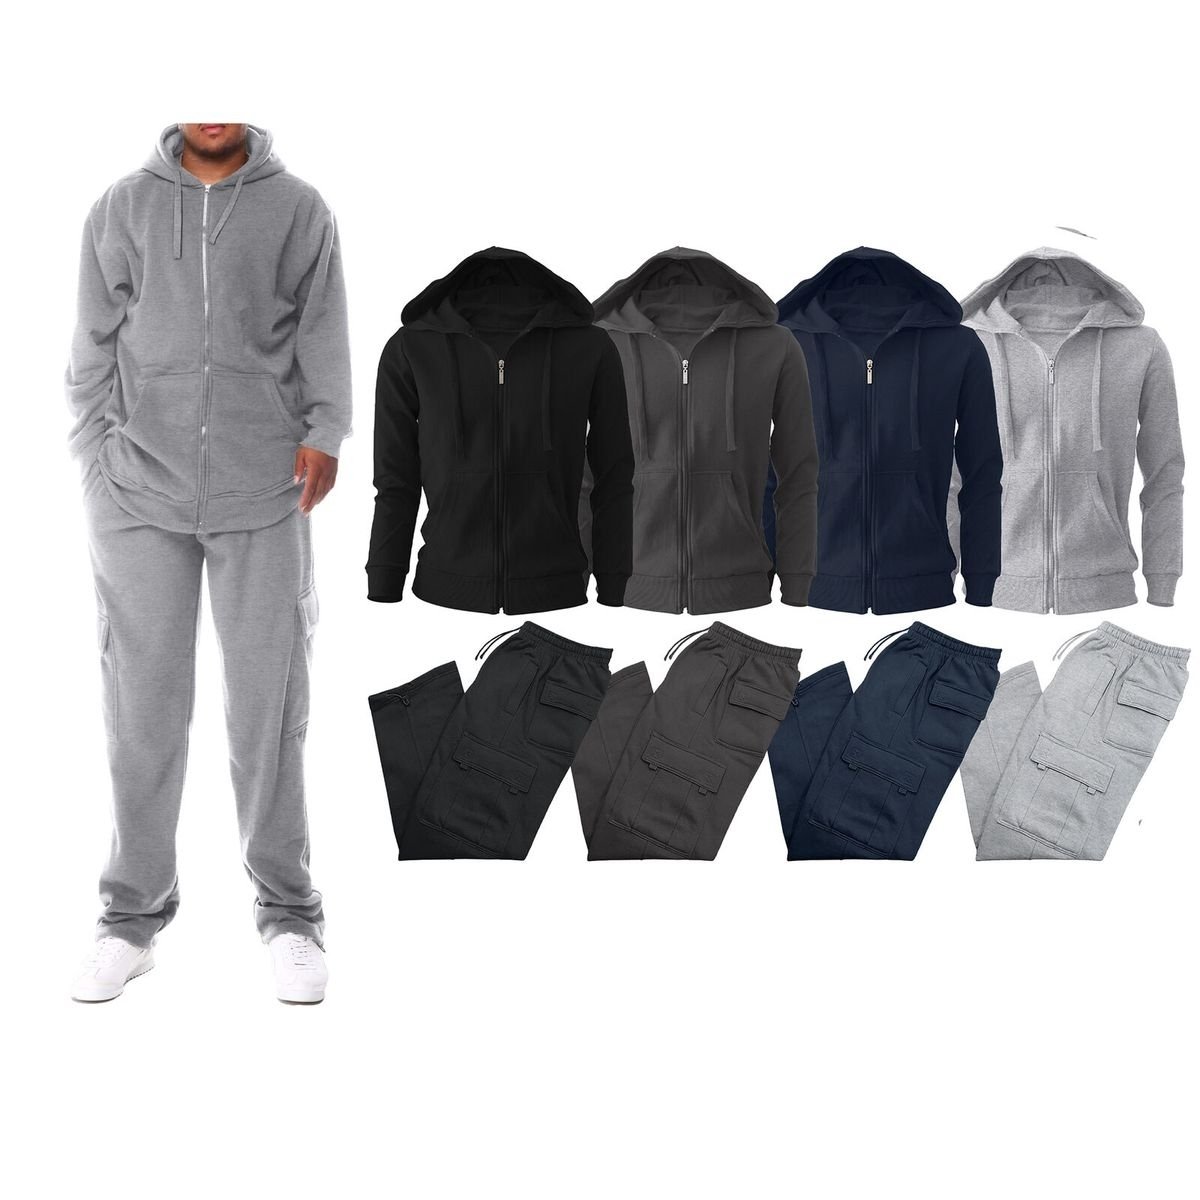 Men's Big & Tall Winter Warm Athletic Active Cozy Fleece Lined Multi-Pocket Full Zip Up Cargo Tracksuit - Charcoal, 3xl